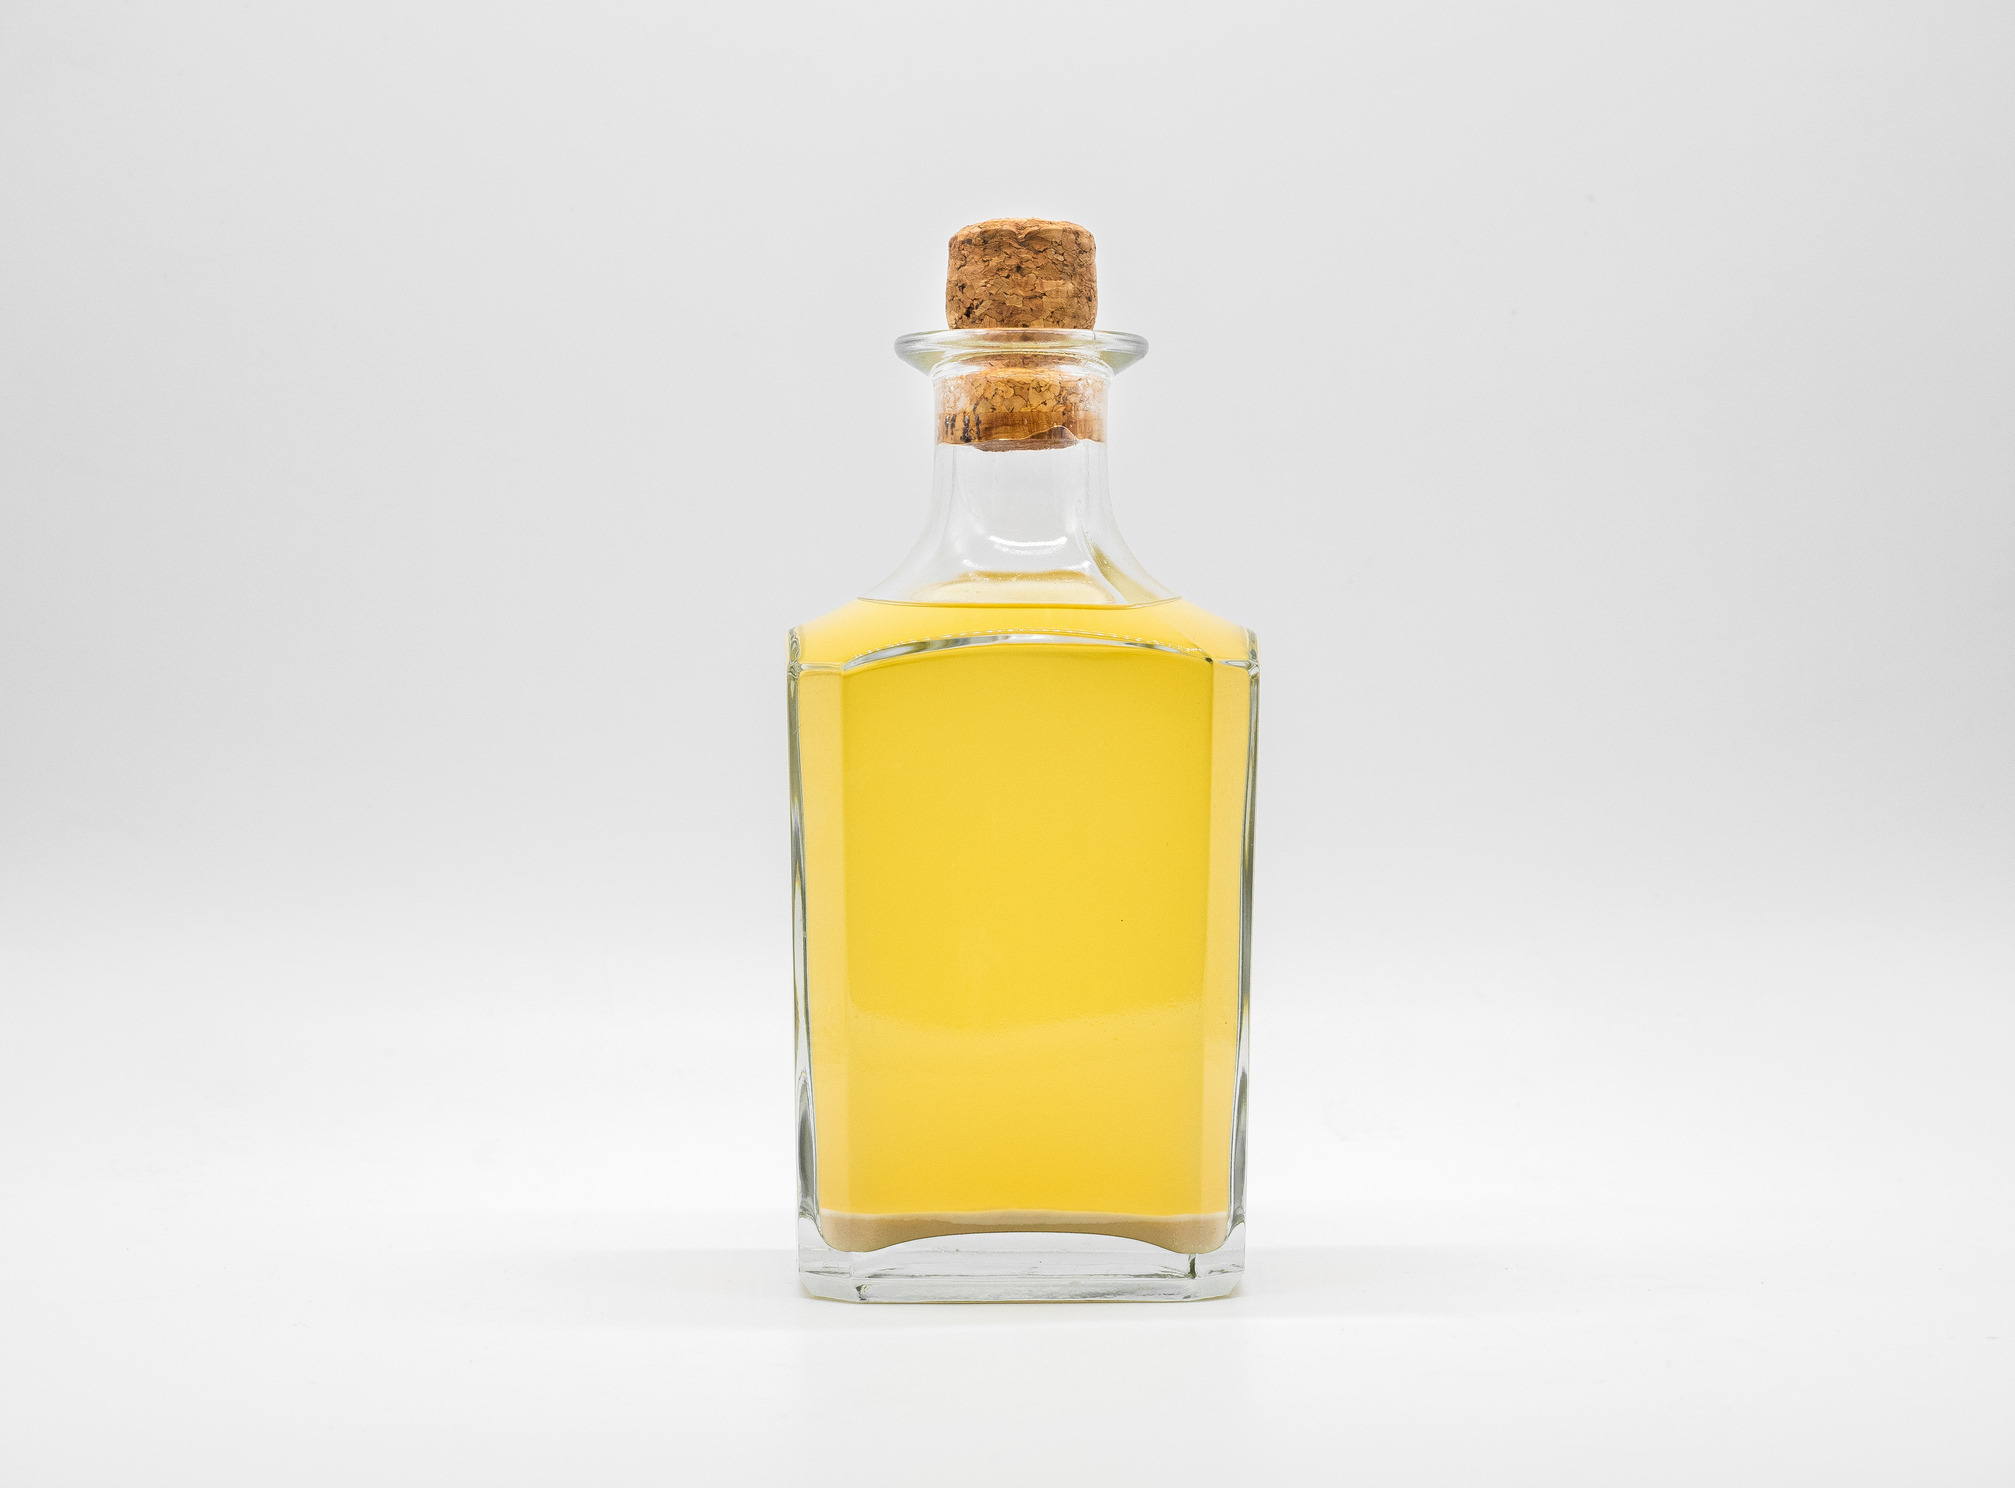 Transparent square bottle with yellow liquid. Front view of the vertical staying jar.